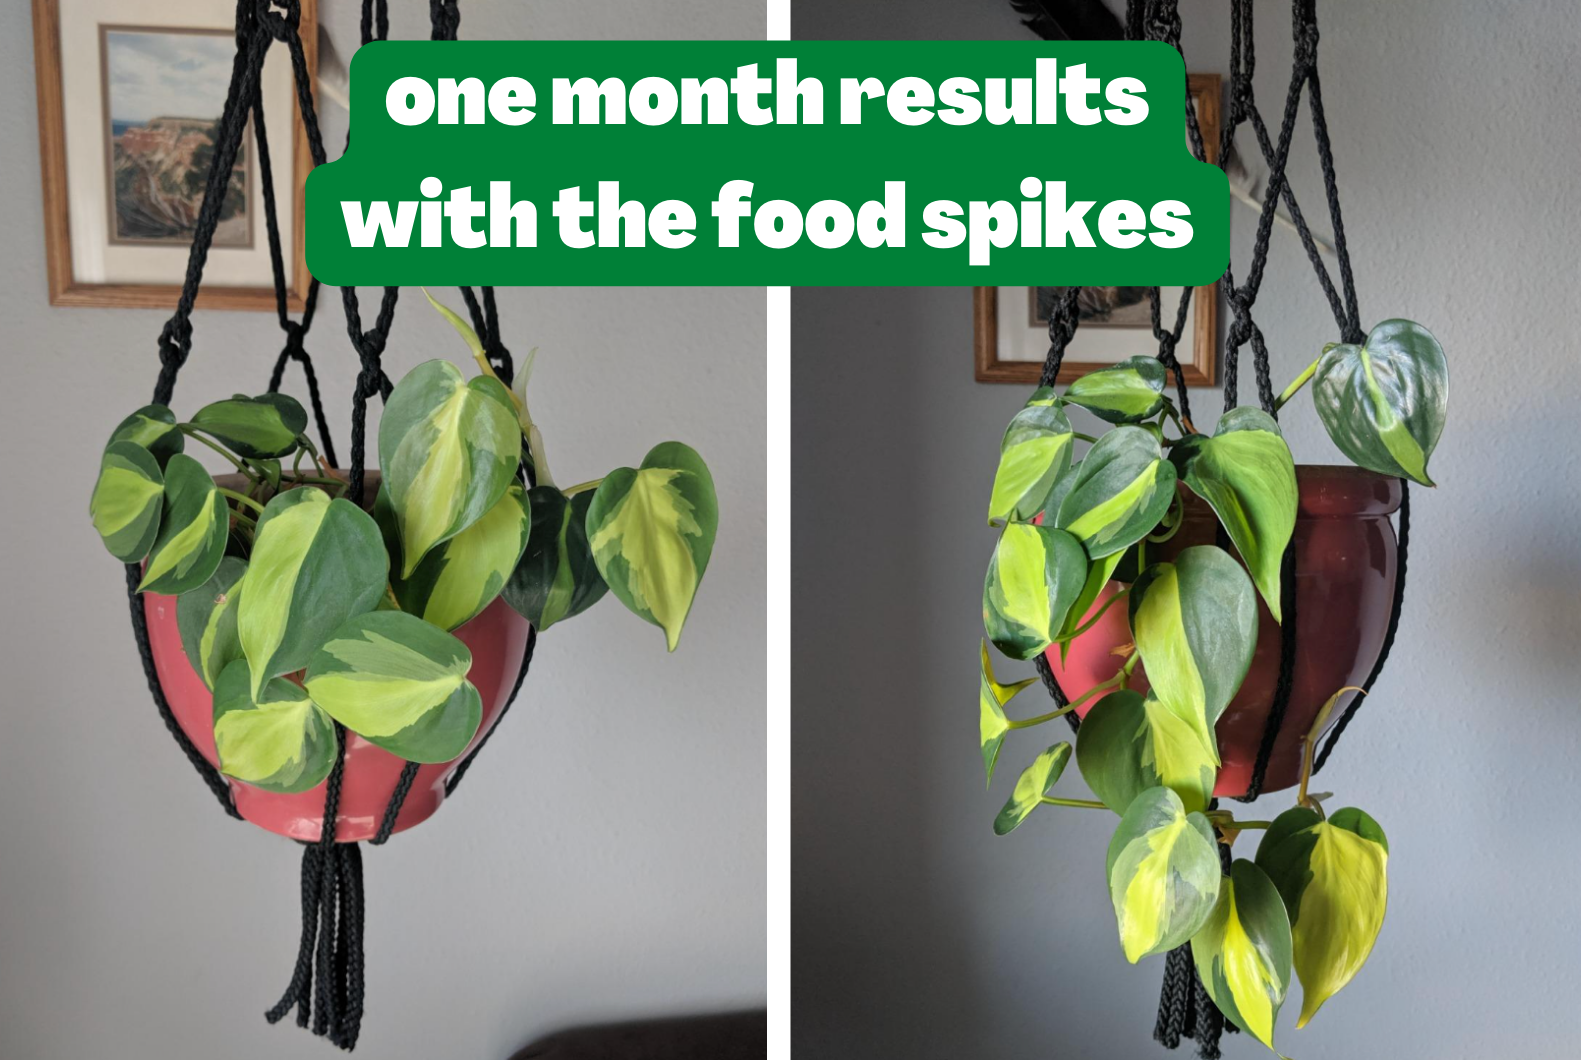 Reviewer progress photo of their plant after using the food spikes for a month